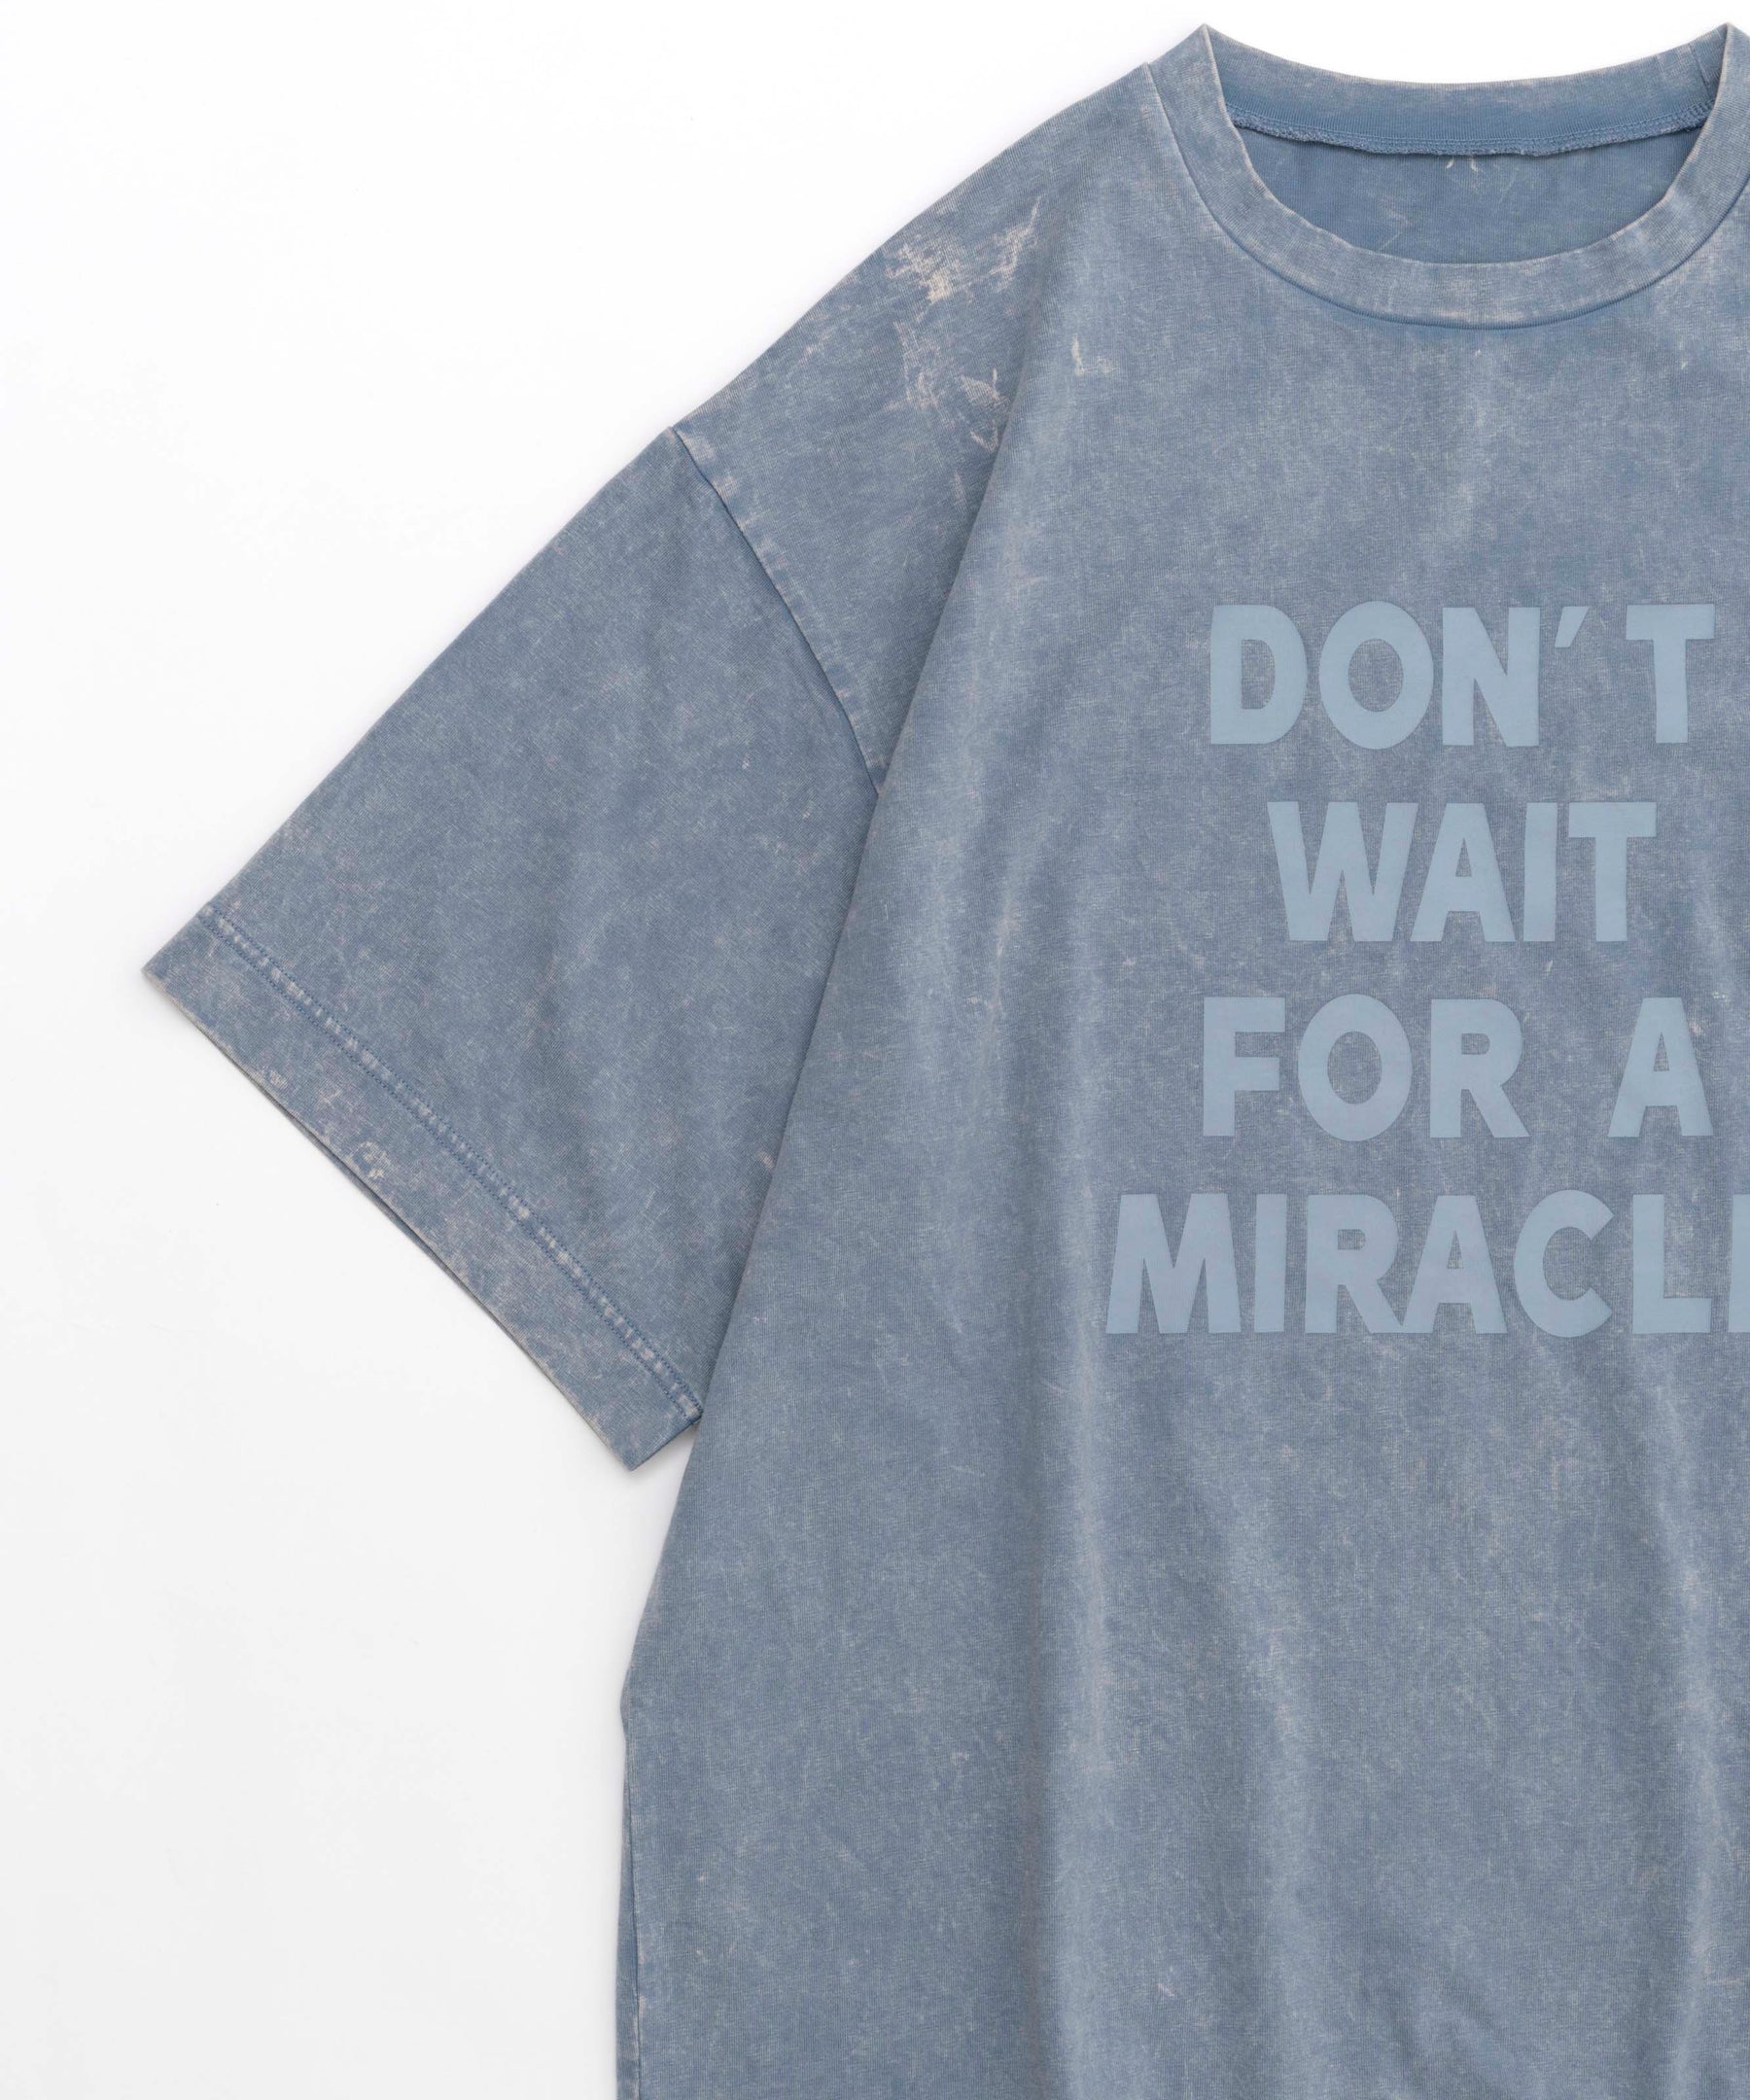 Miracle Over T-shirt